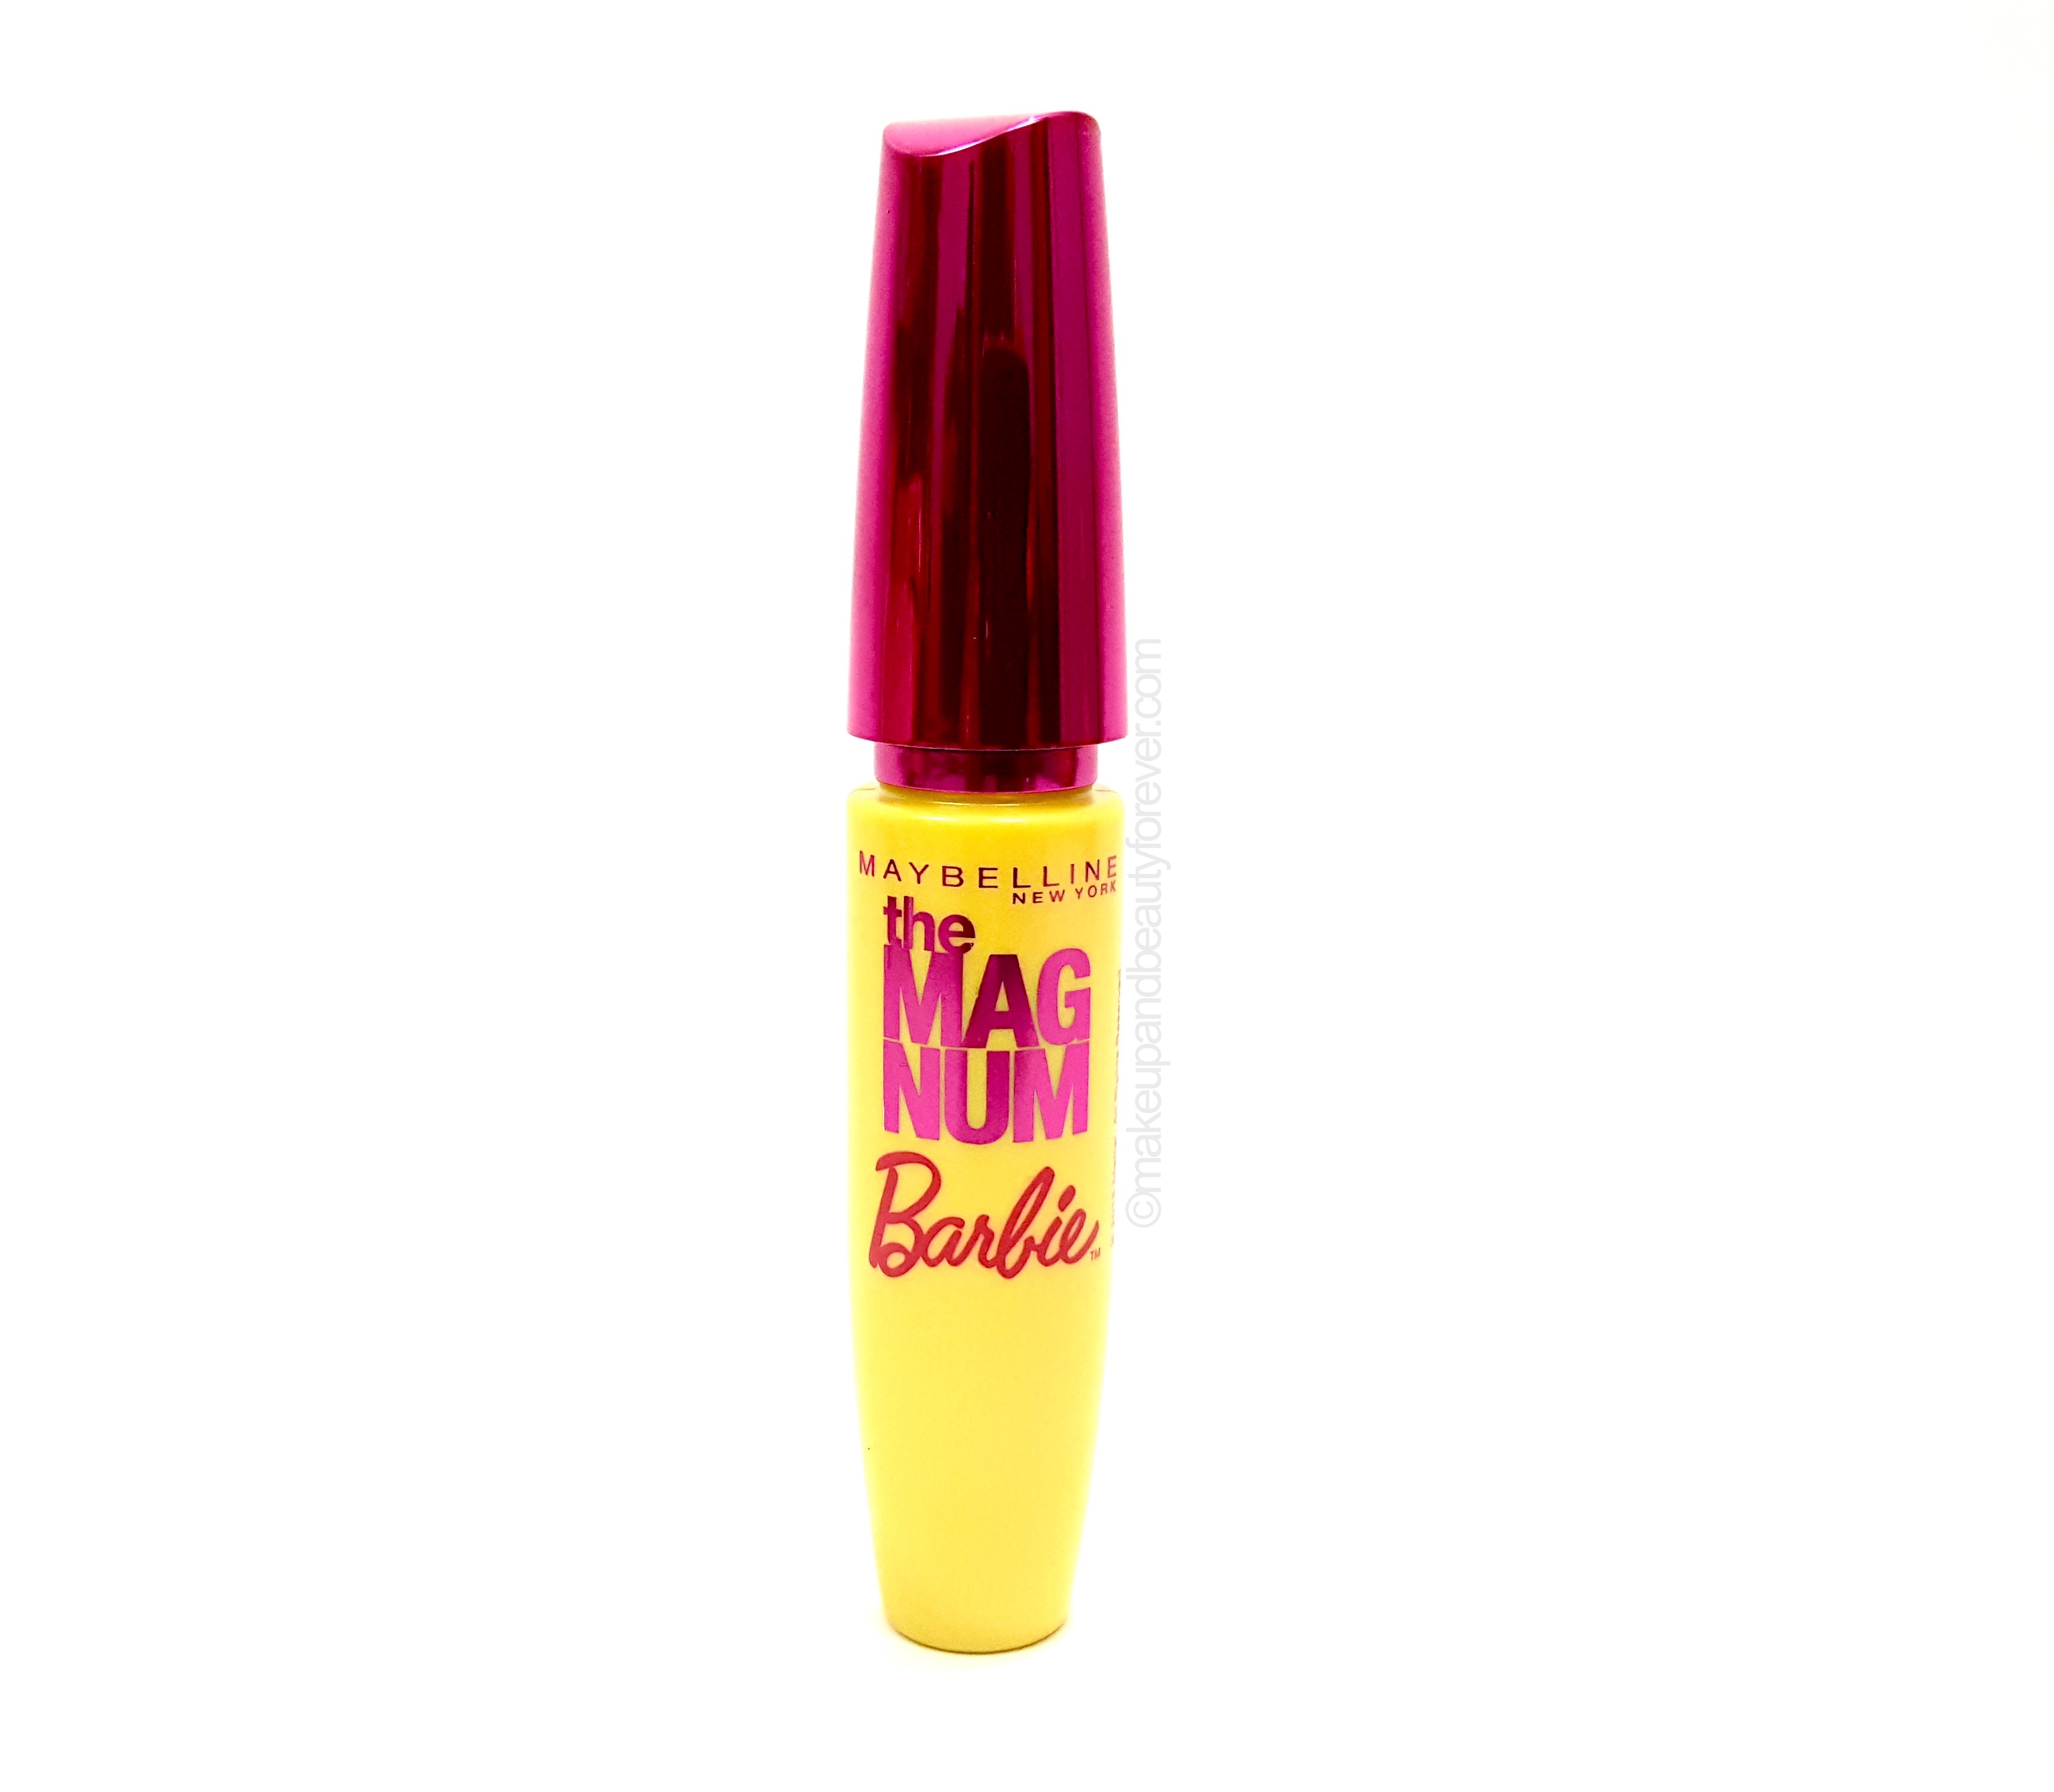 Maybelline Magnum Barbie Mascara Review